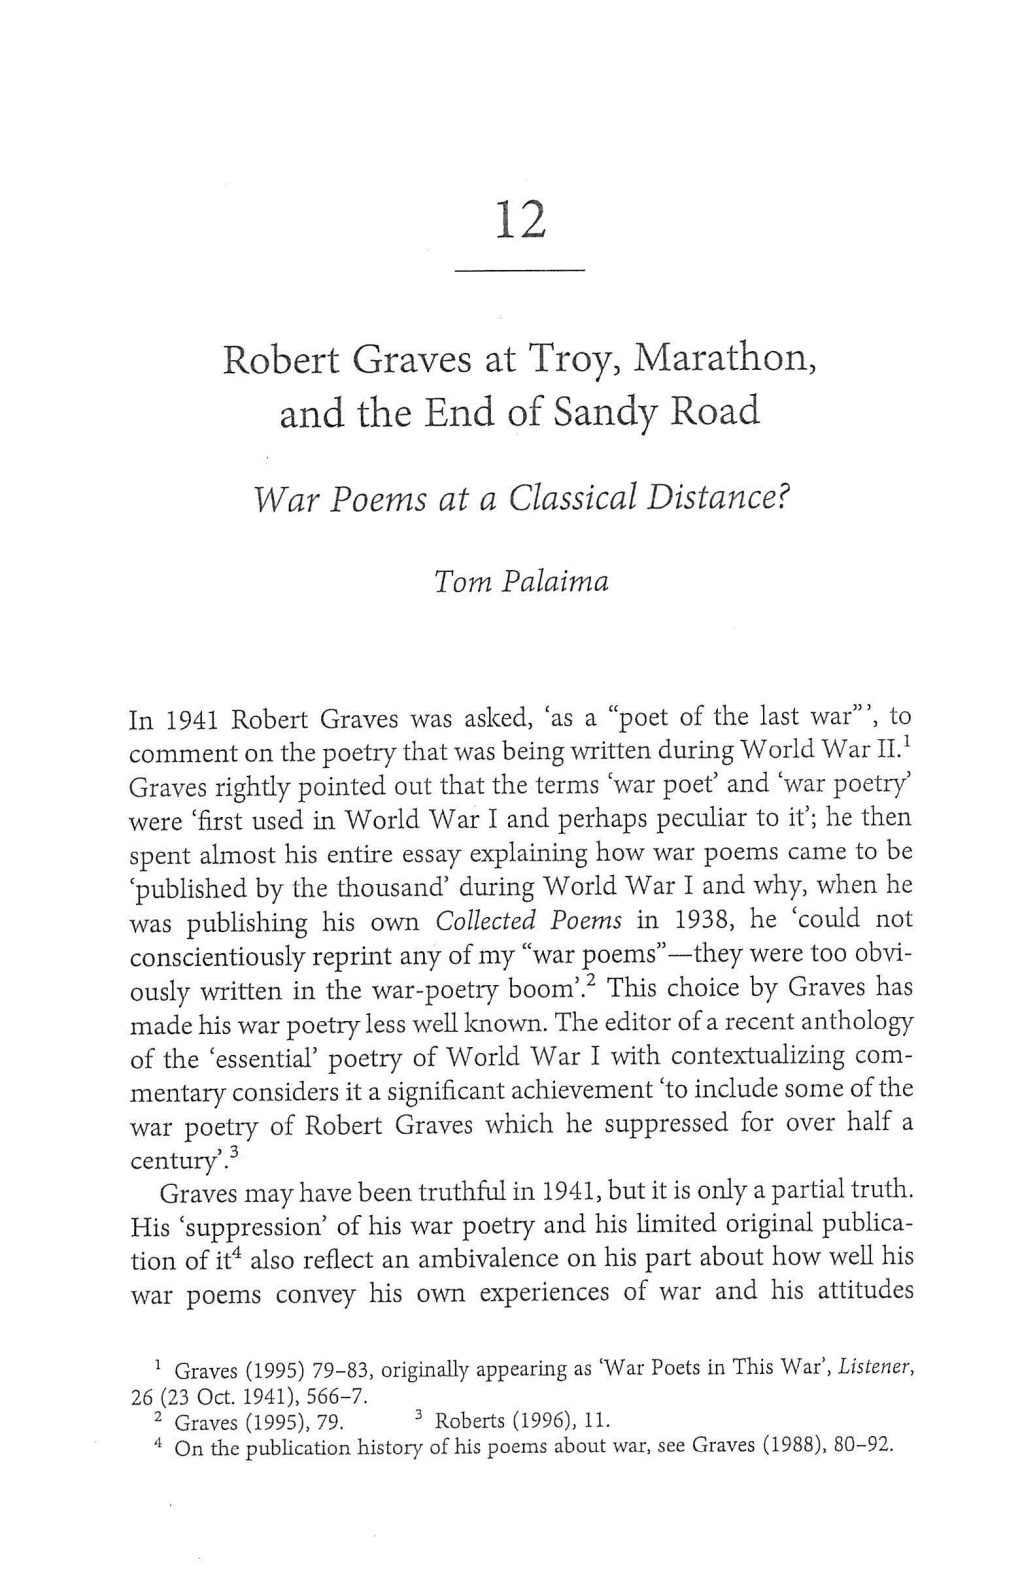 Robert Graves at Troy, Marathon, and the End of Sandy Road